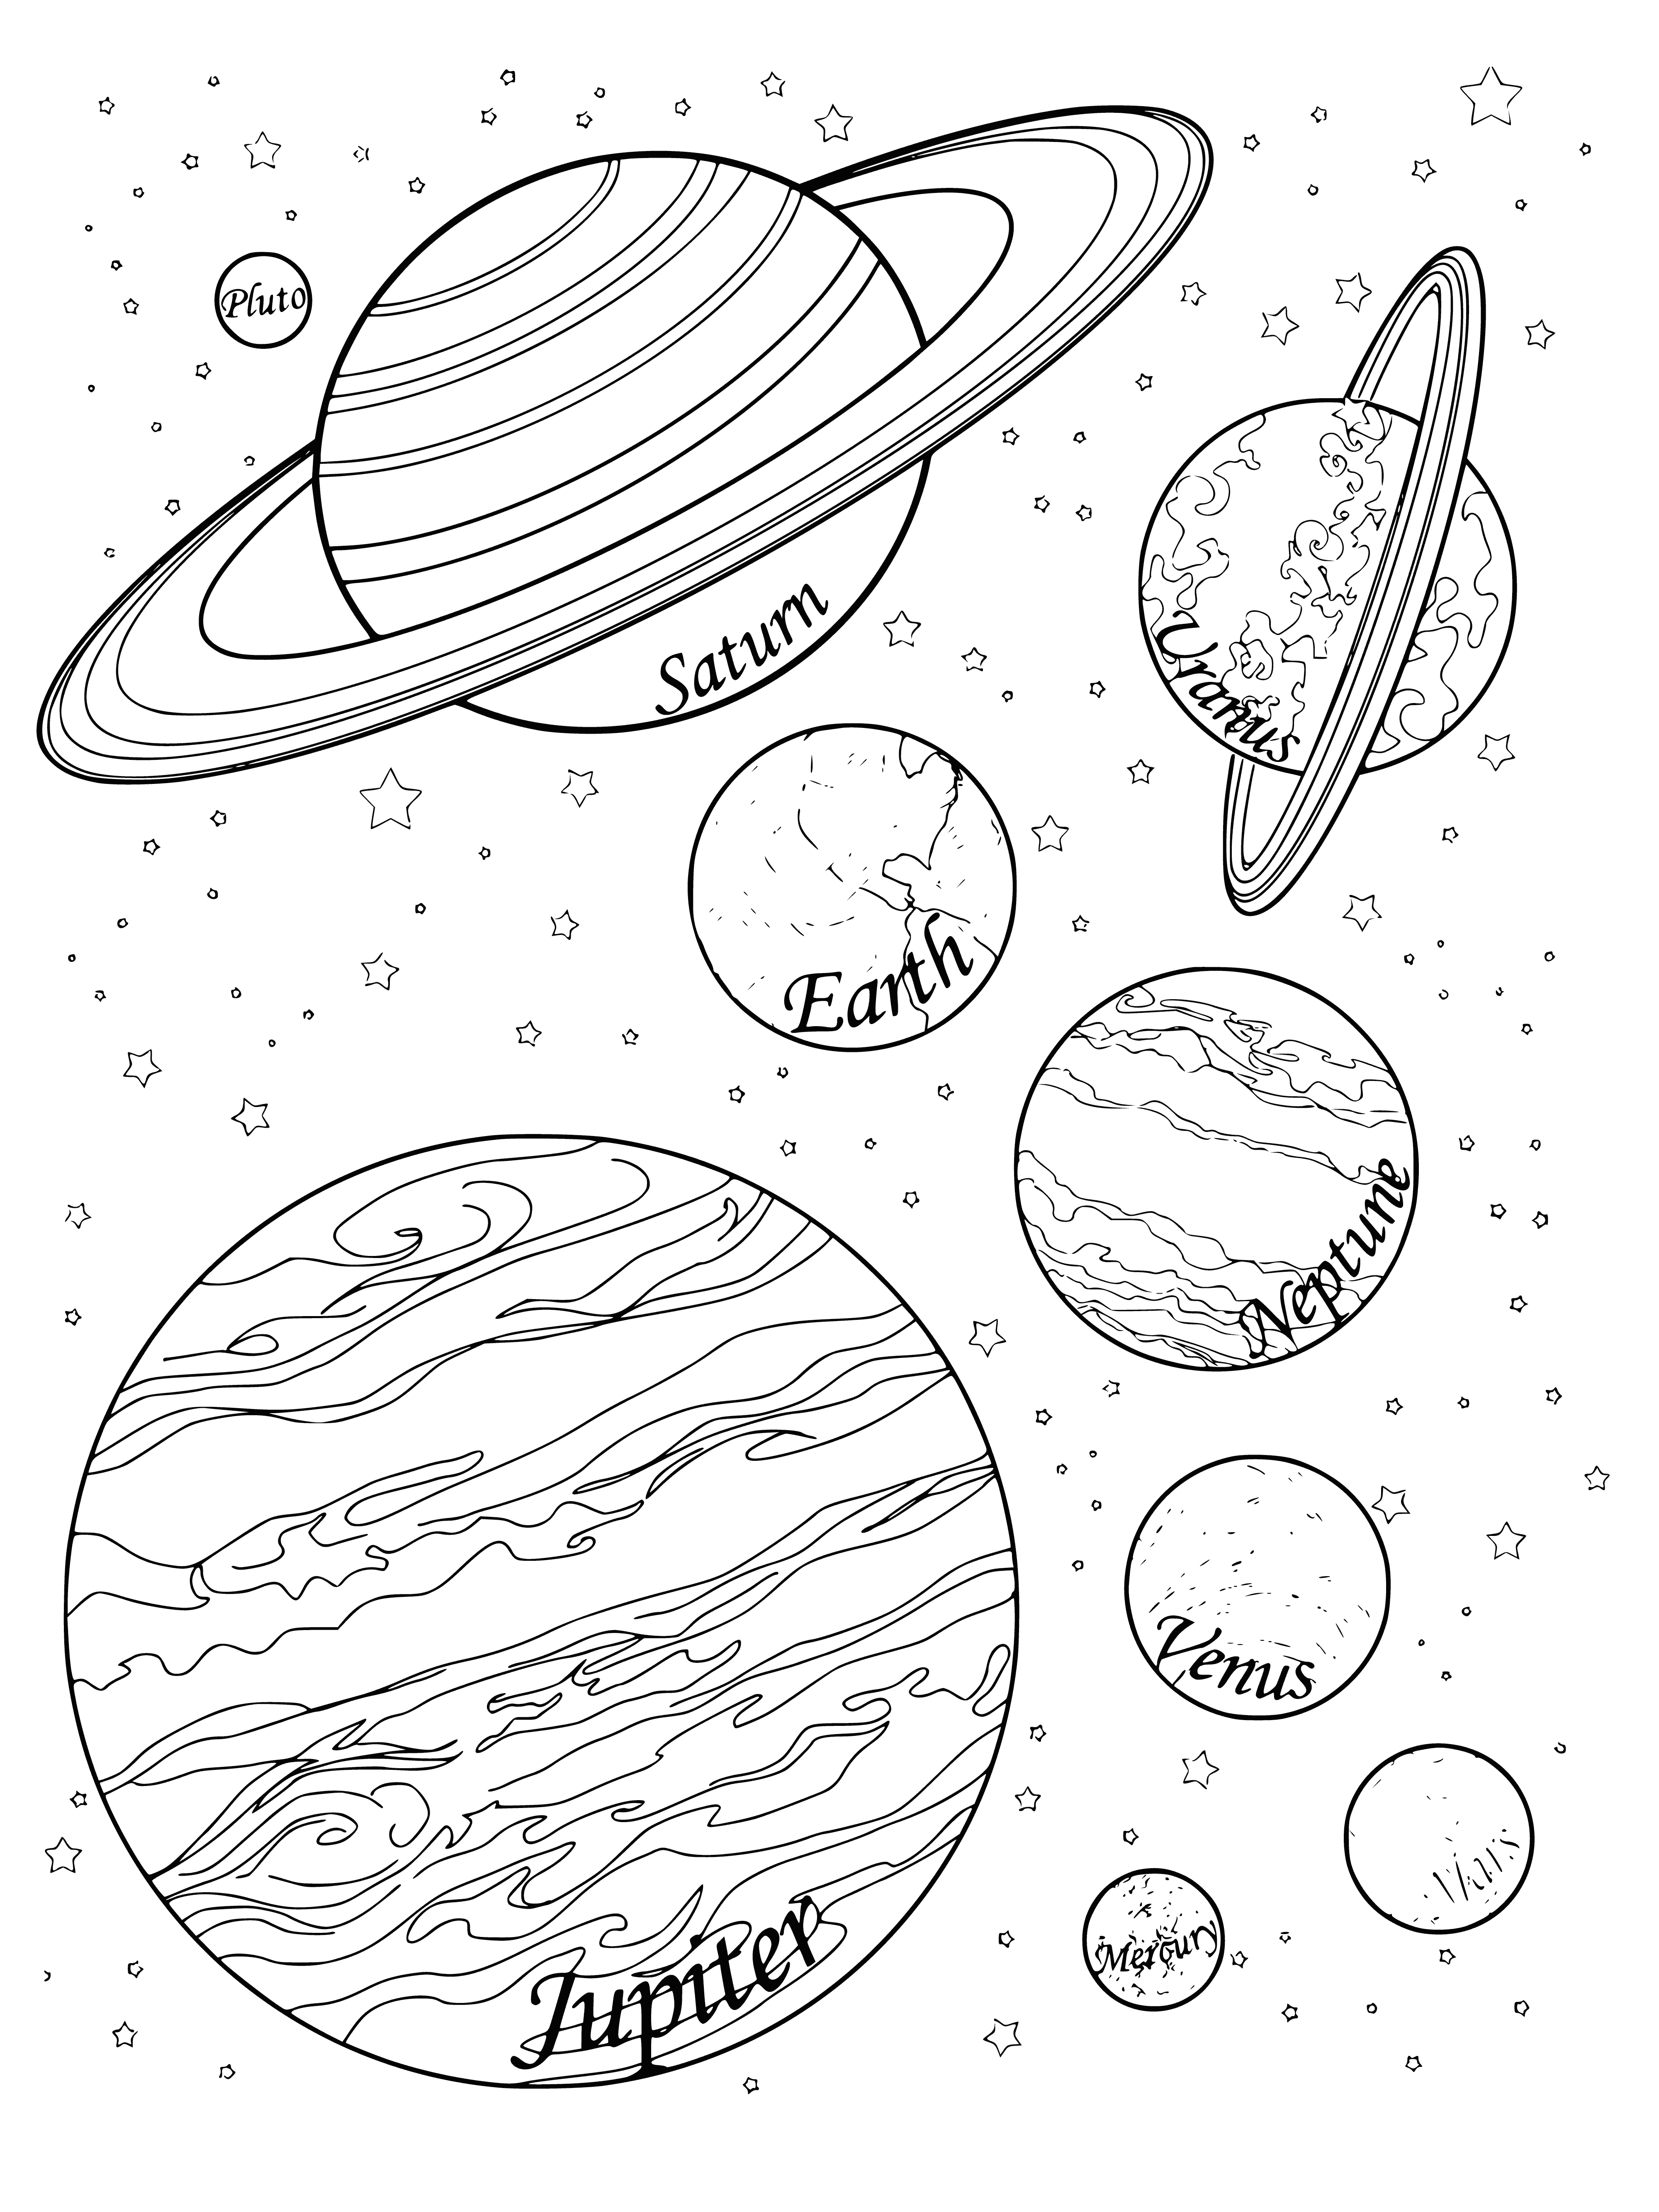 coloring page: Space is everything beyond Earth's atmosphere and includes stars, planets, galaxies, asteroids, and more! #spacefacts